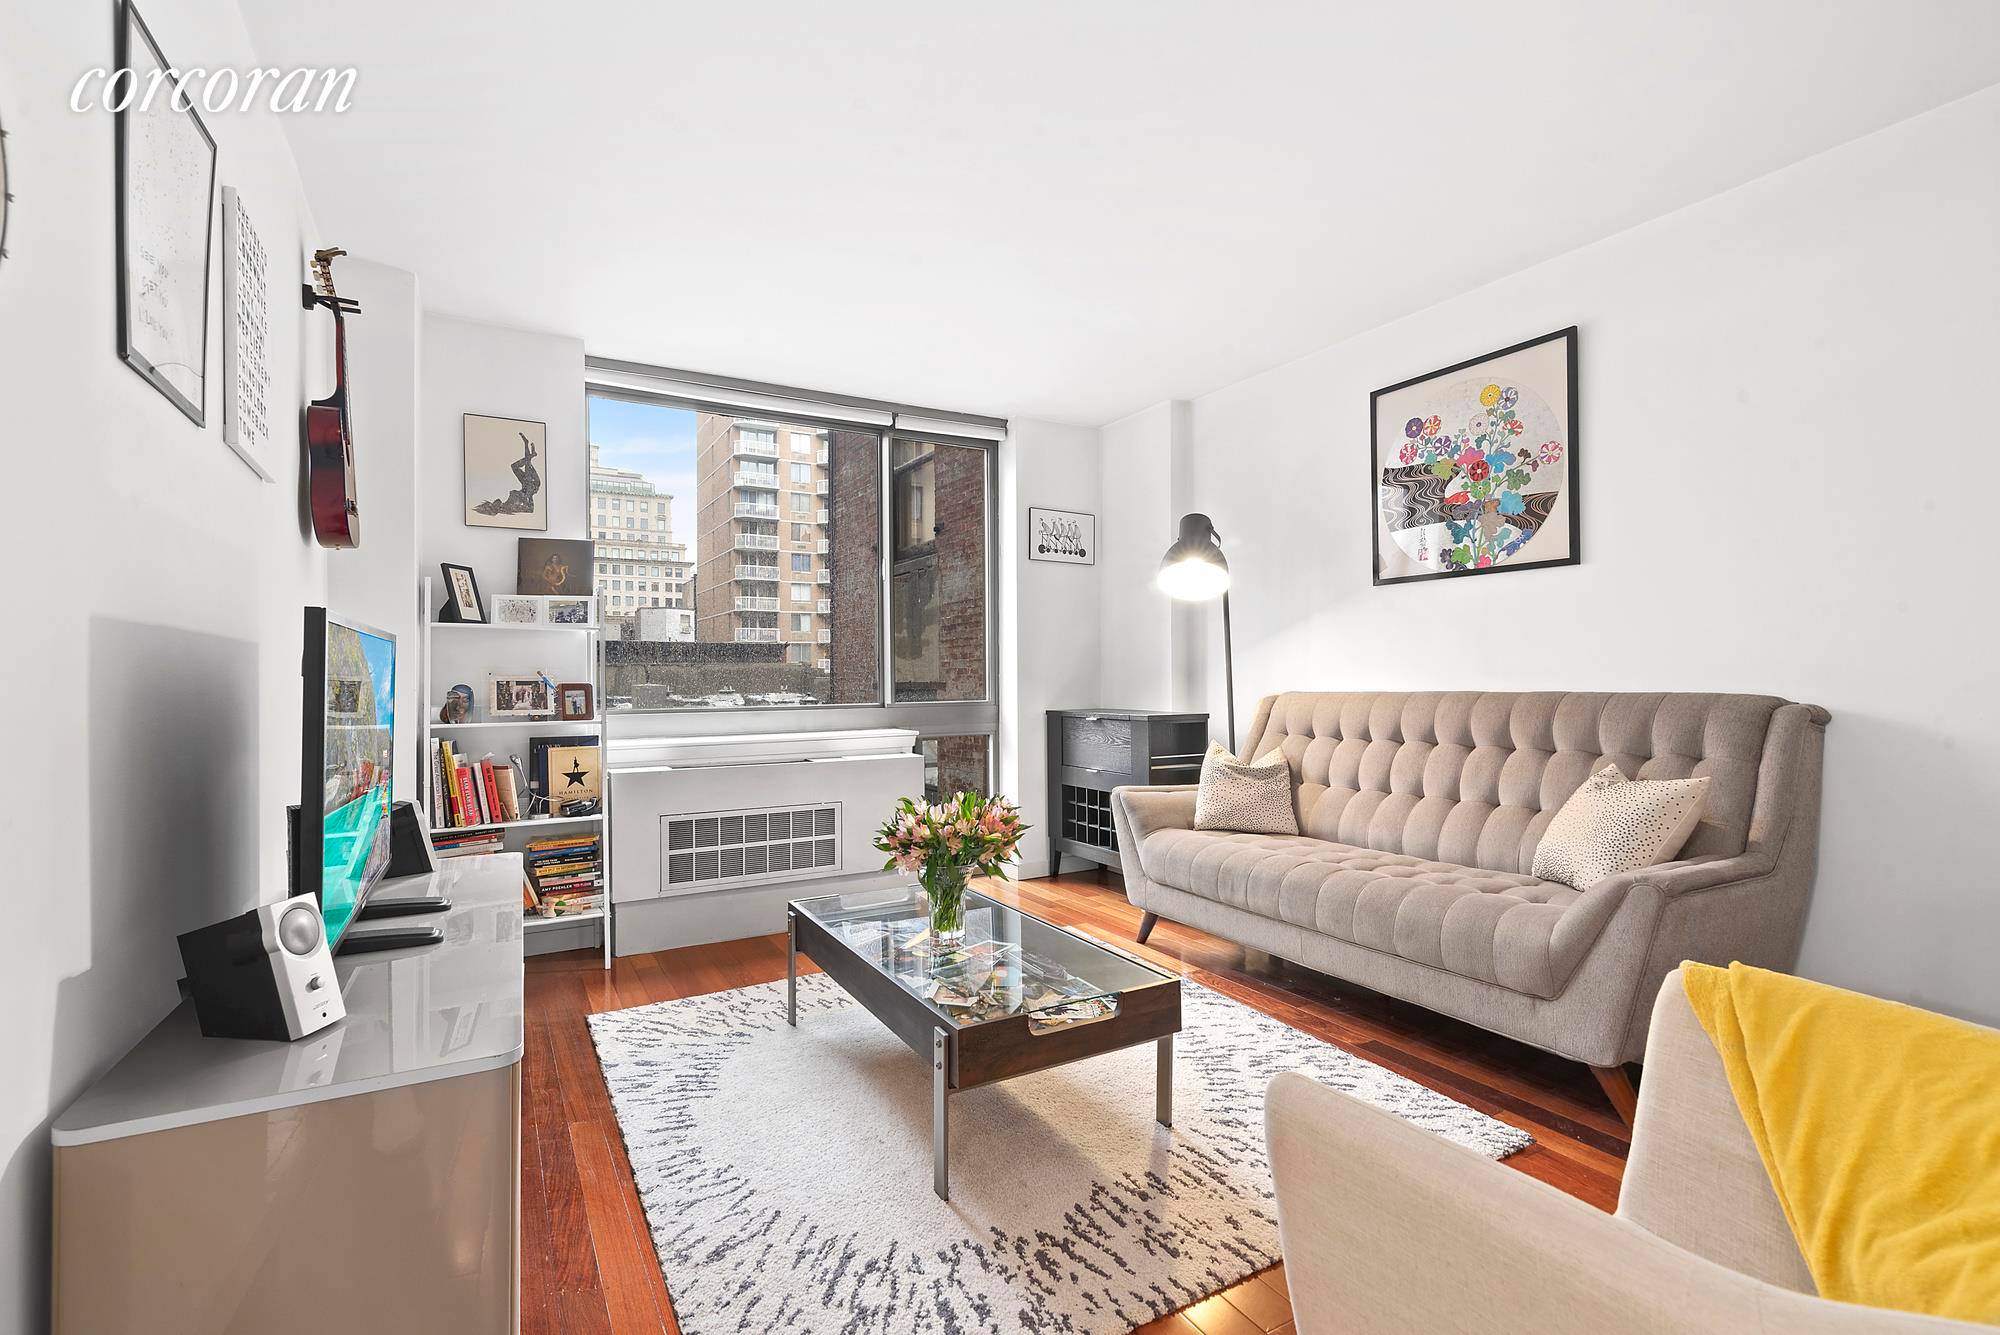 Make your home in this stylish and serene 1 bedroom at the ideally located Crossing 23rd condominium.